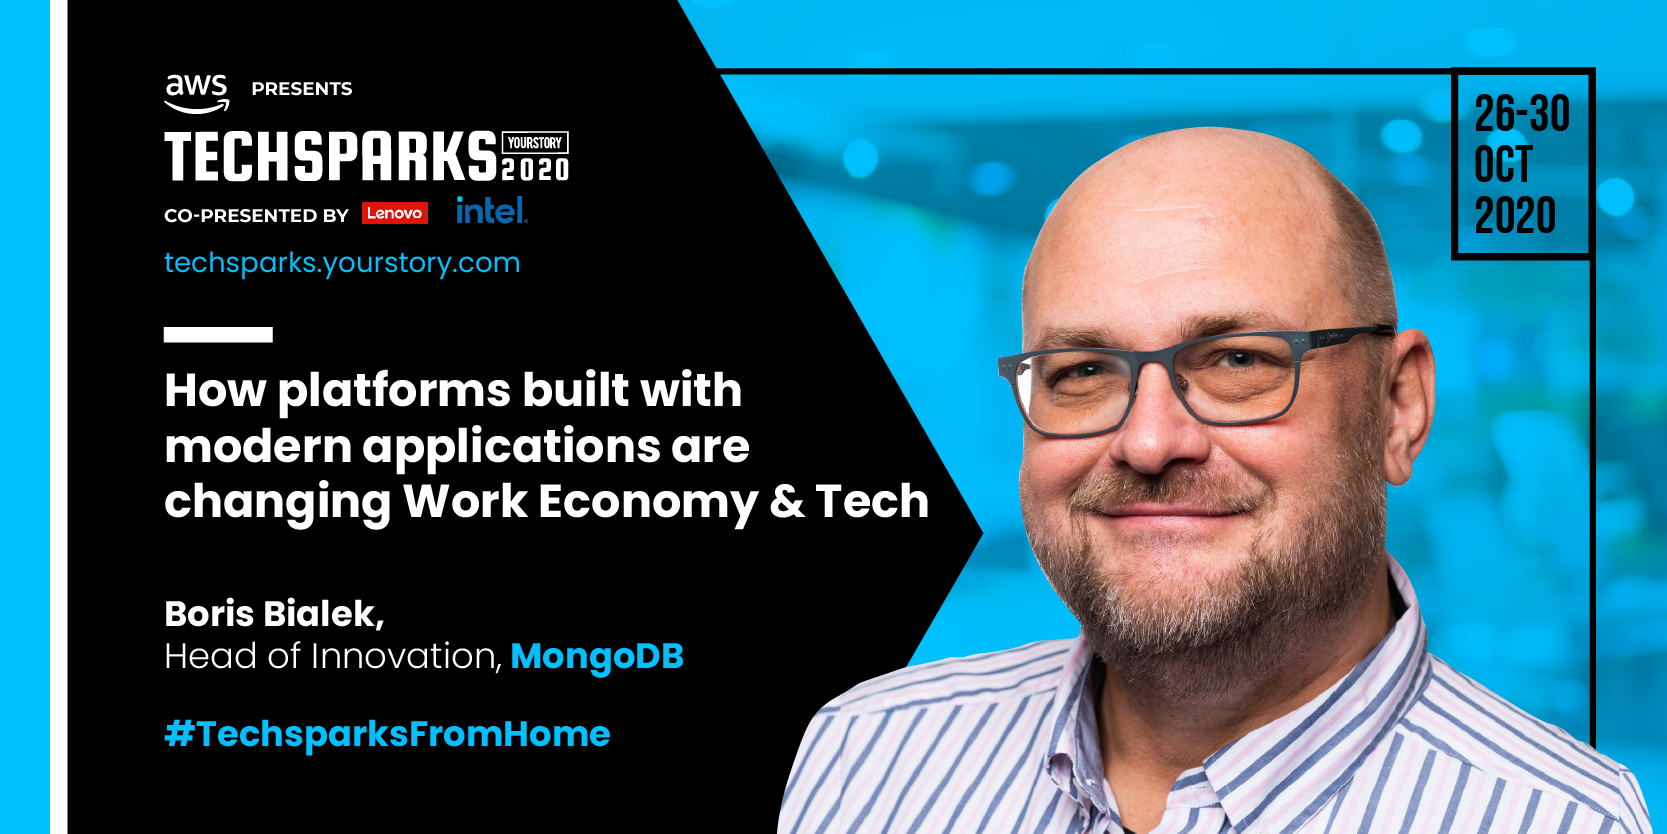 [TechSparks 2020] ‘Every business is a software whose success is defined by data;’ Boris Bialek of MongoDB dives deep into digital transformation